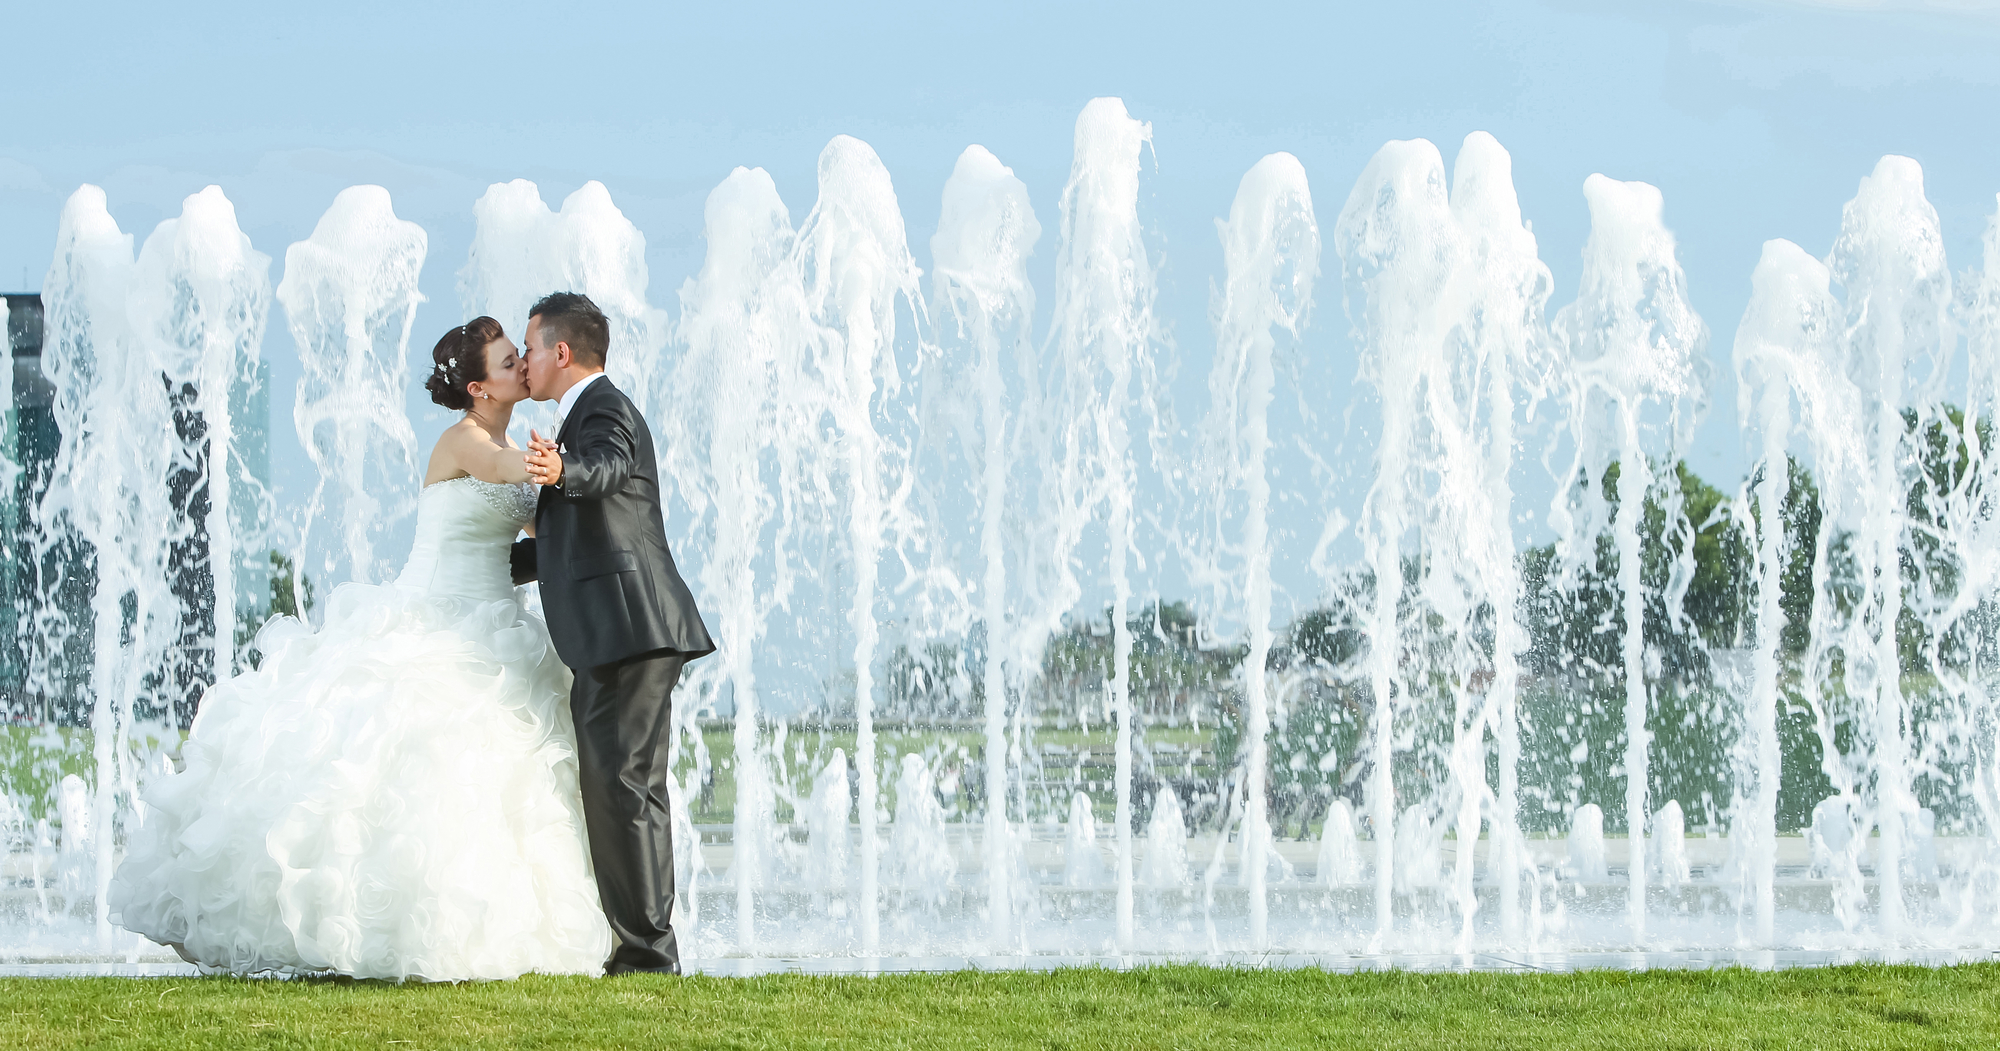 Bride and groom kissing in front of water spray fountain